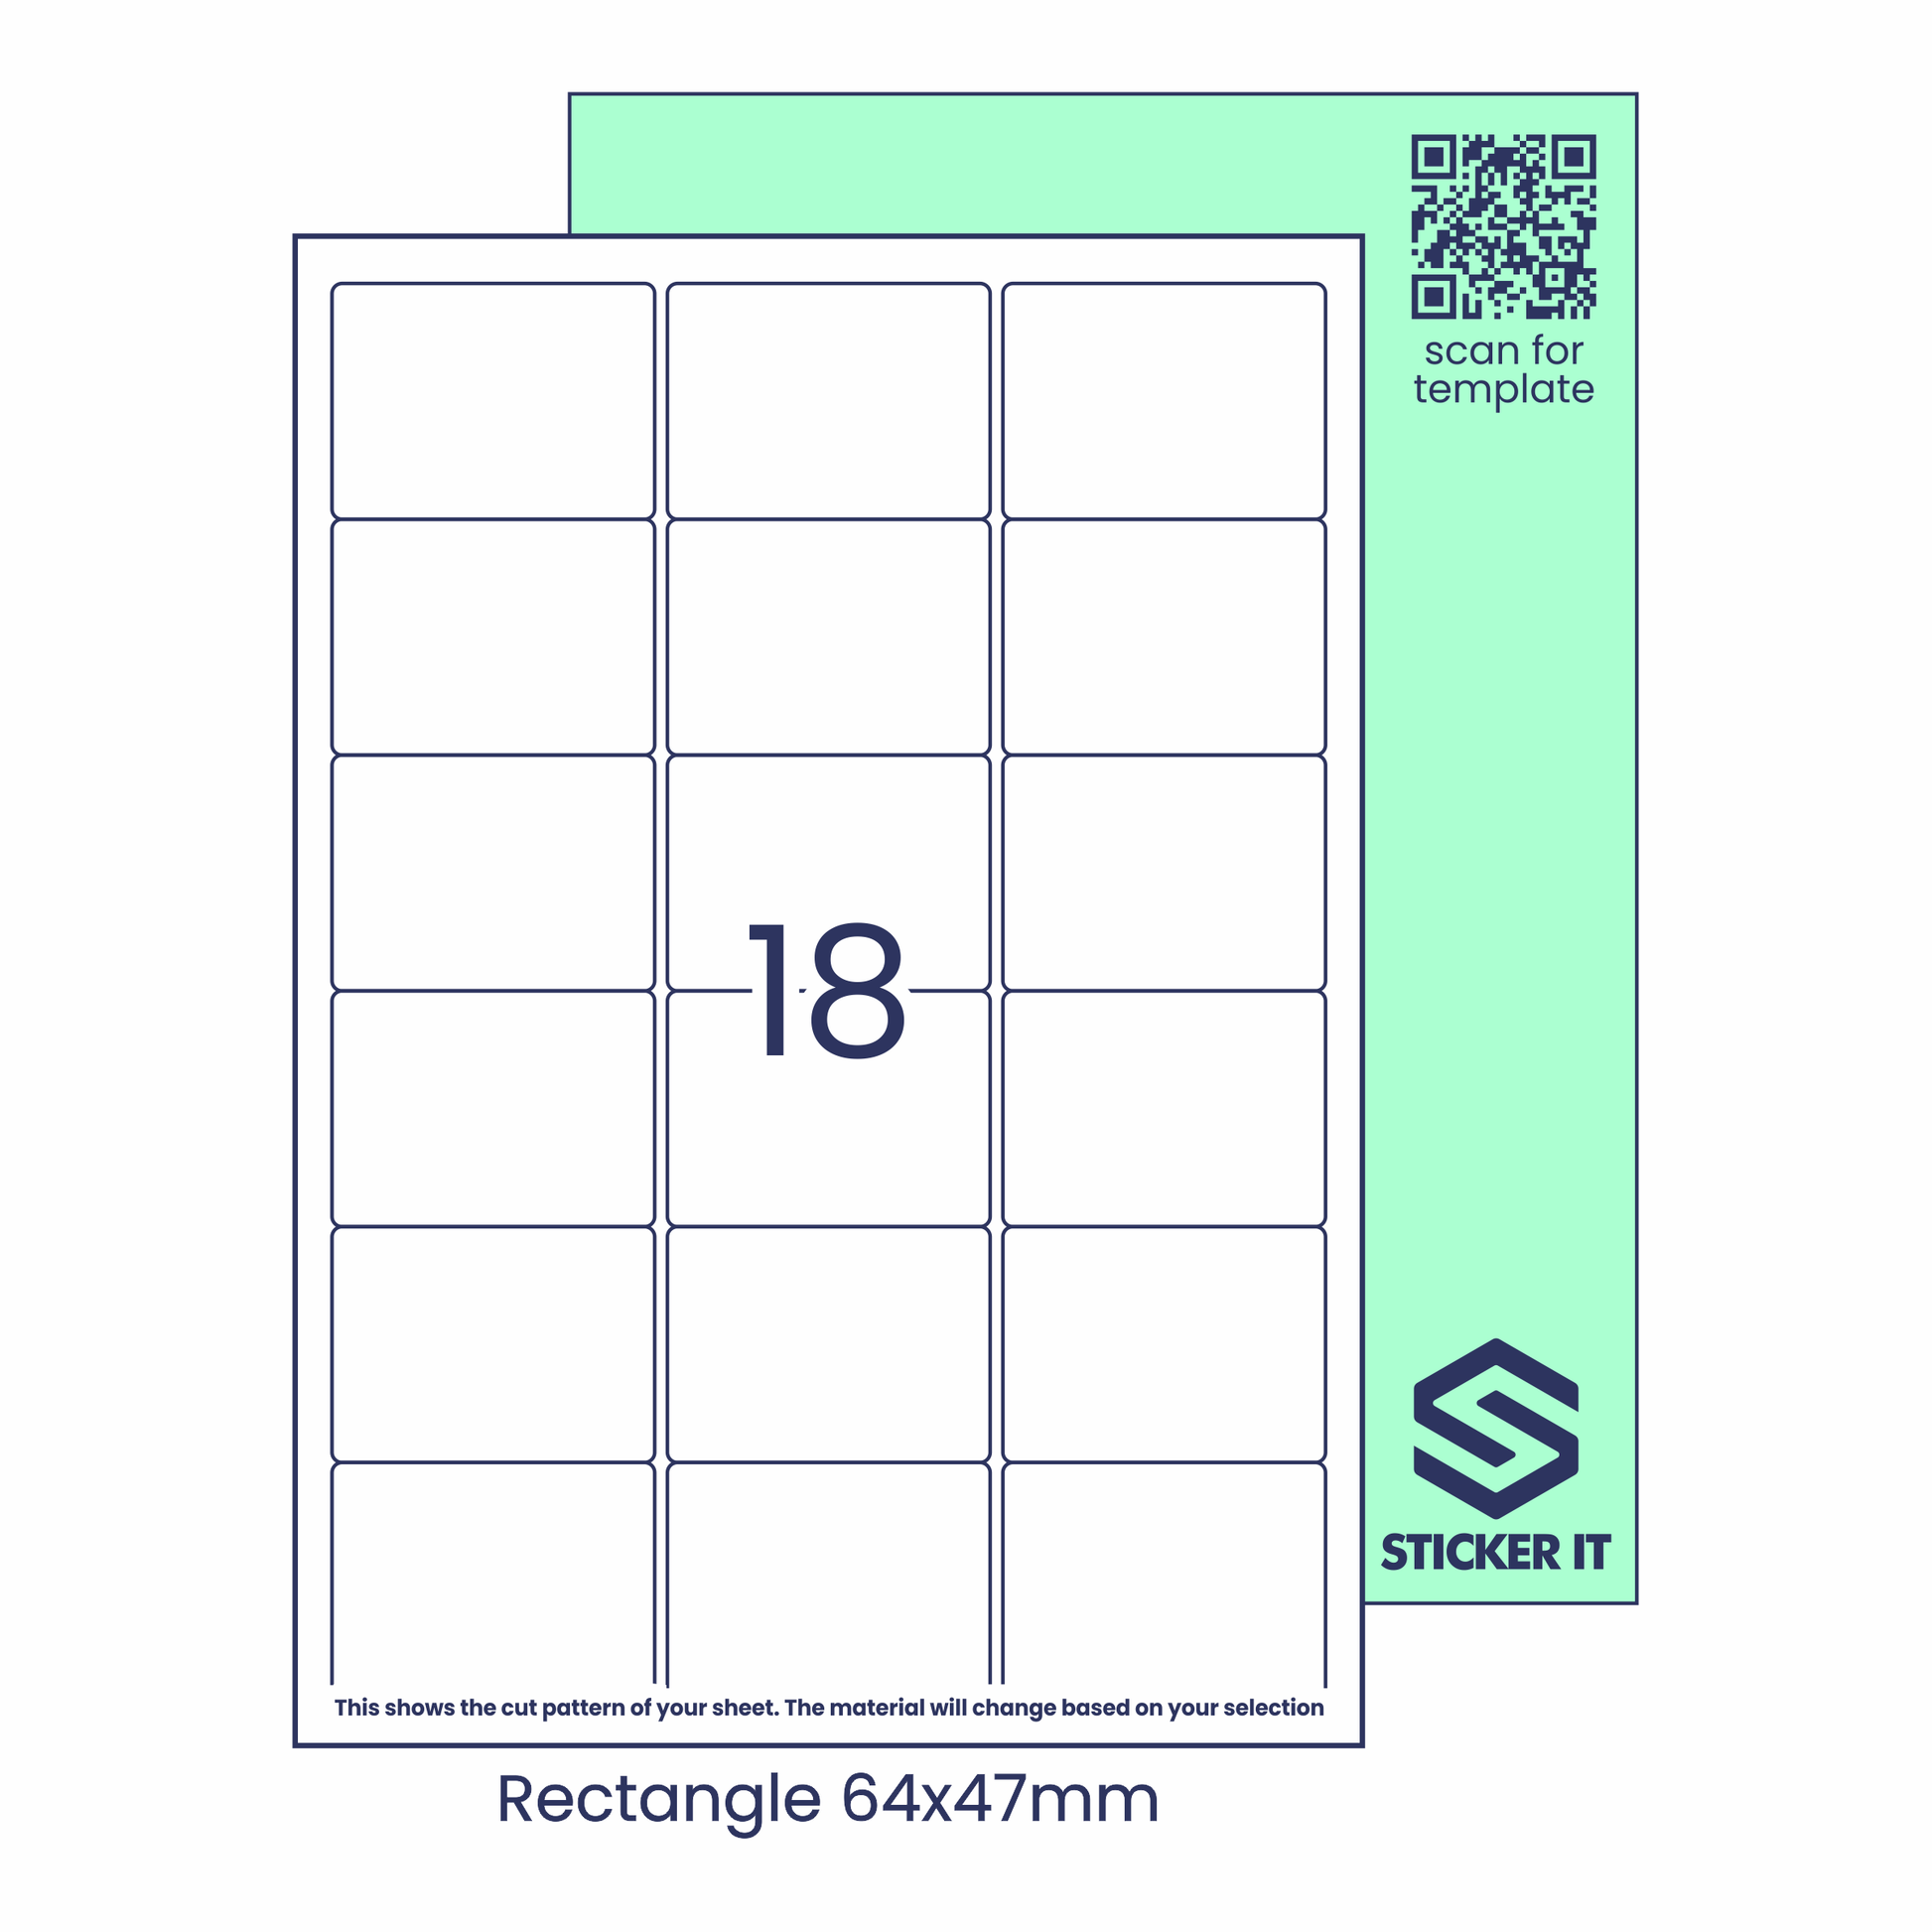 Blank labels rectangle 64x47 18 image